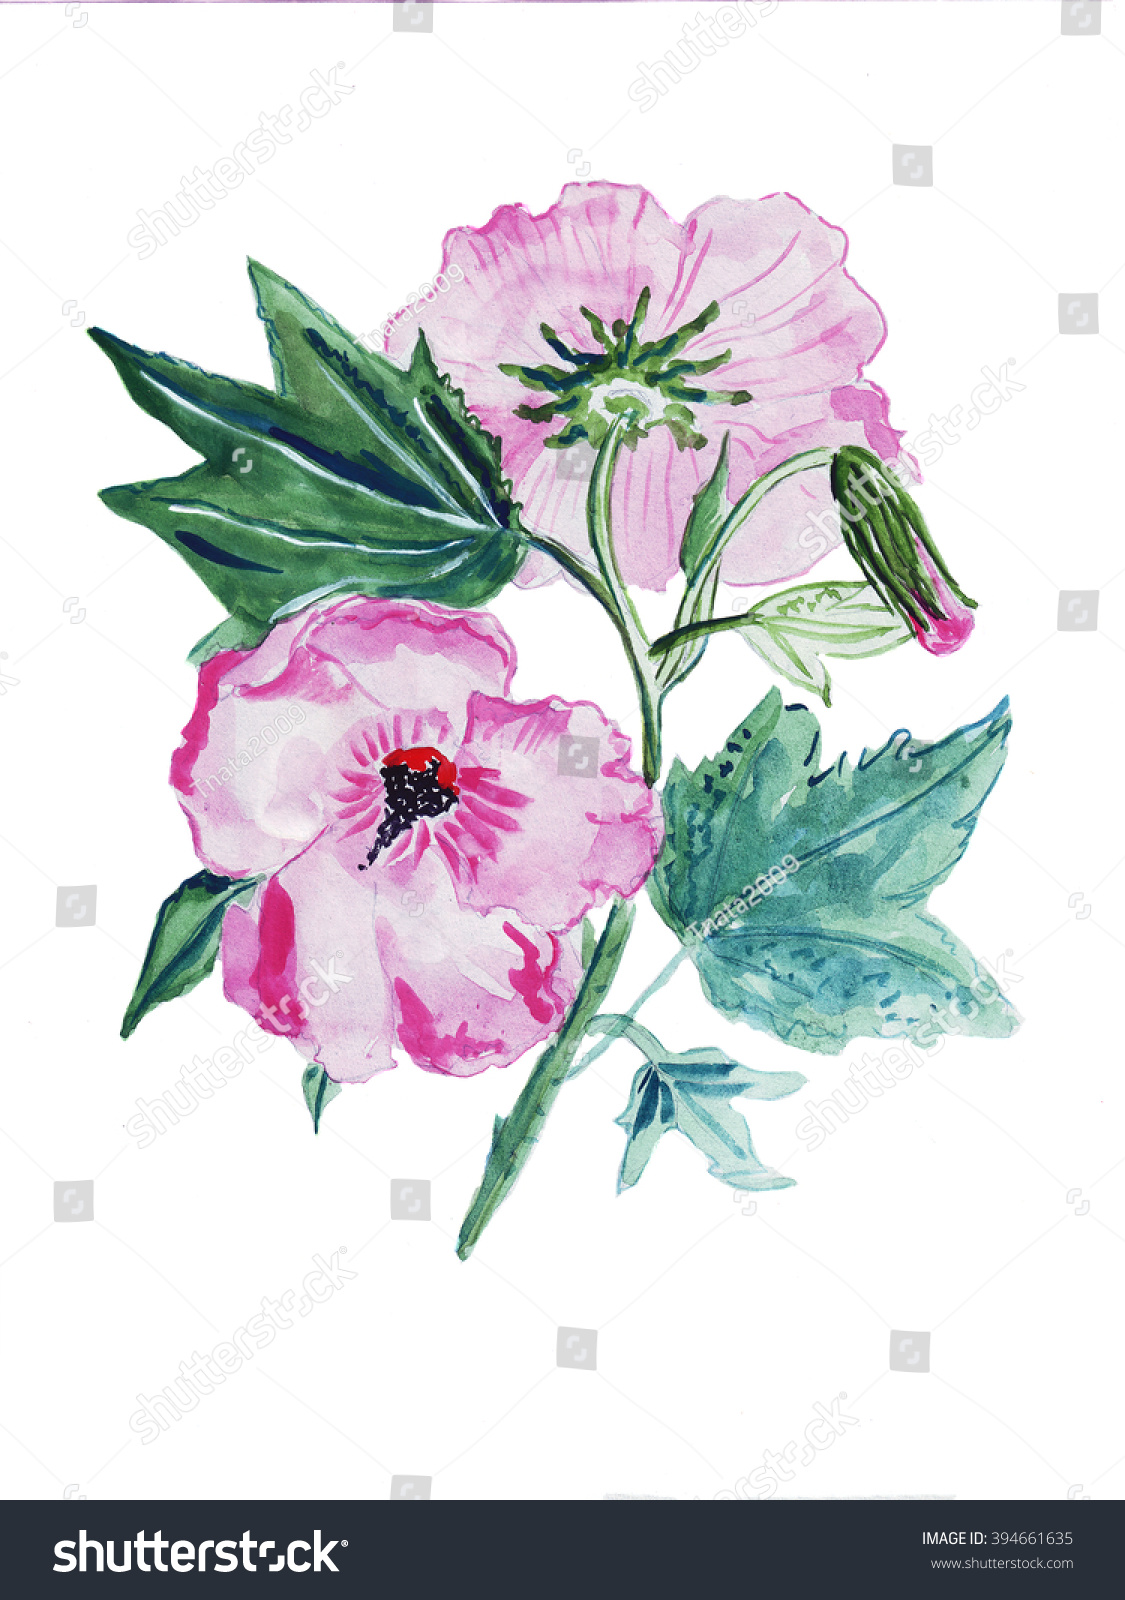 Illustration Sketch Several Begonia Flowers In A Bouquet On A White ...